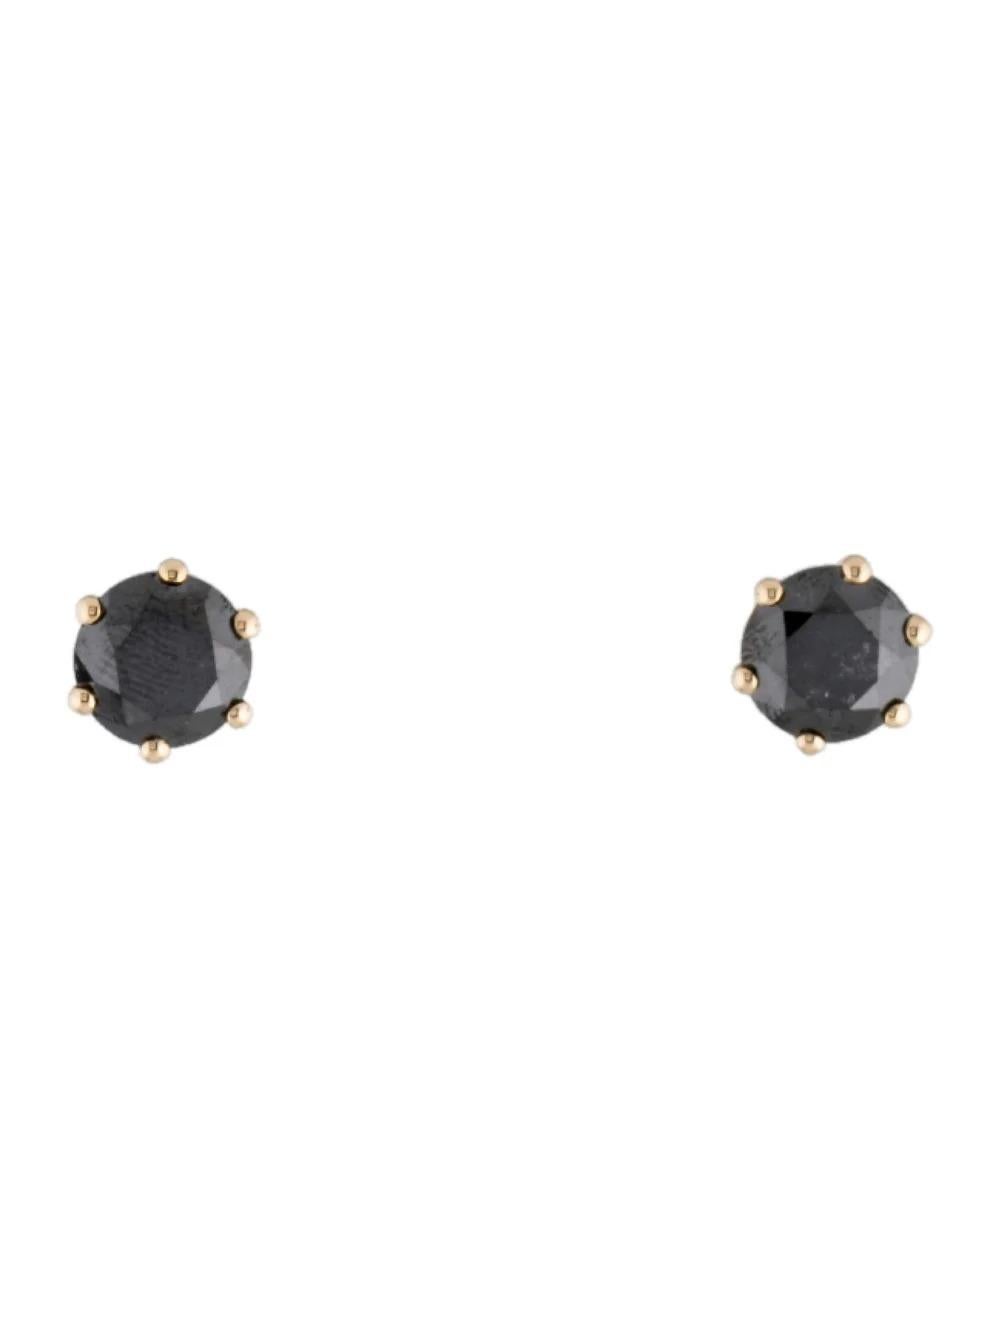 Elevate your ensemble with these exquisite 14K Yellow Gold Diamond Stud Earrings. Crafted to perfection, these earrings feature two round brilliant diamonds, each boasting a stunning carat weight of 2.54 and 2.53, respectively.

Specifications:

*